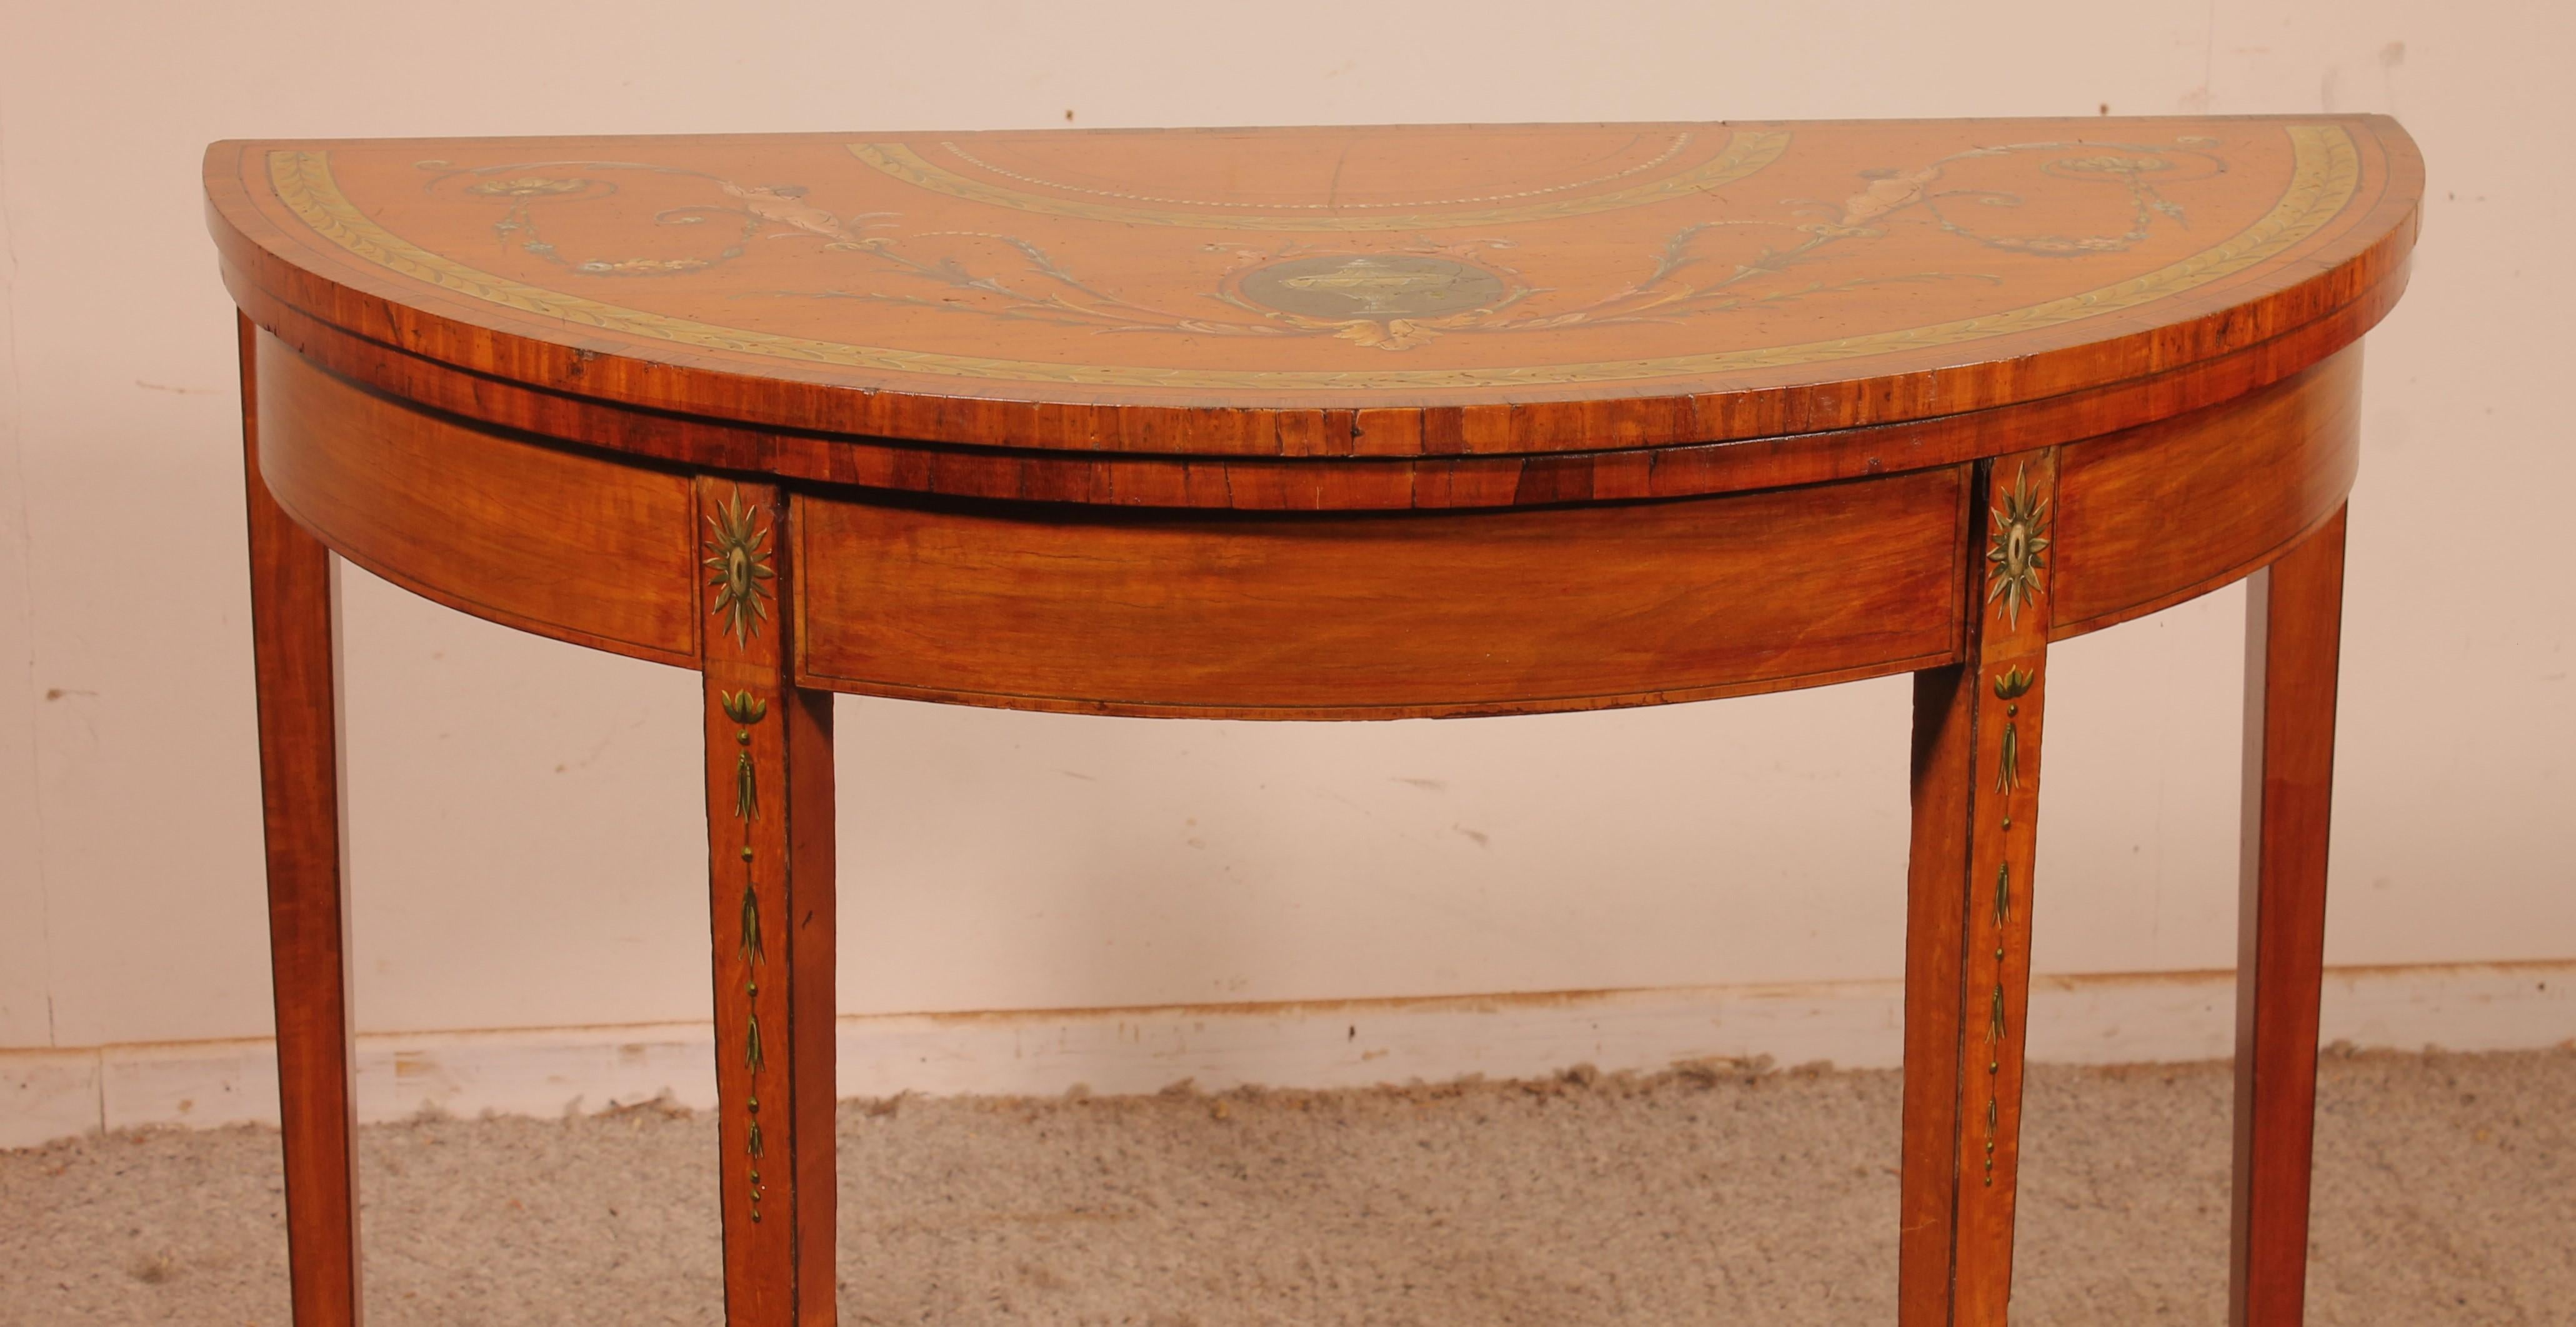 Elegant console or card table in satinwood and hand painted circa 1790 from Ireland.

Indeed, the satin and polychrome consoles are very often Irish. In addition, the top shelf is slightly advanced in order to lift it easily. This is typical from